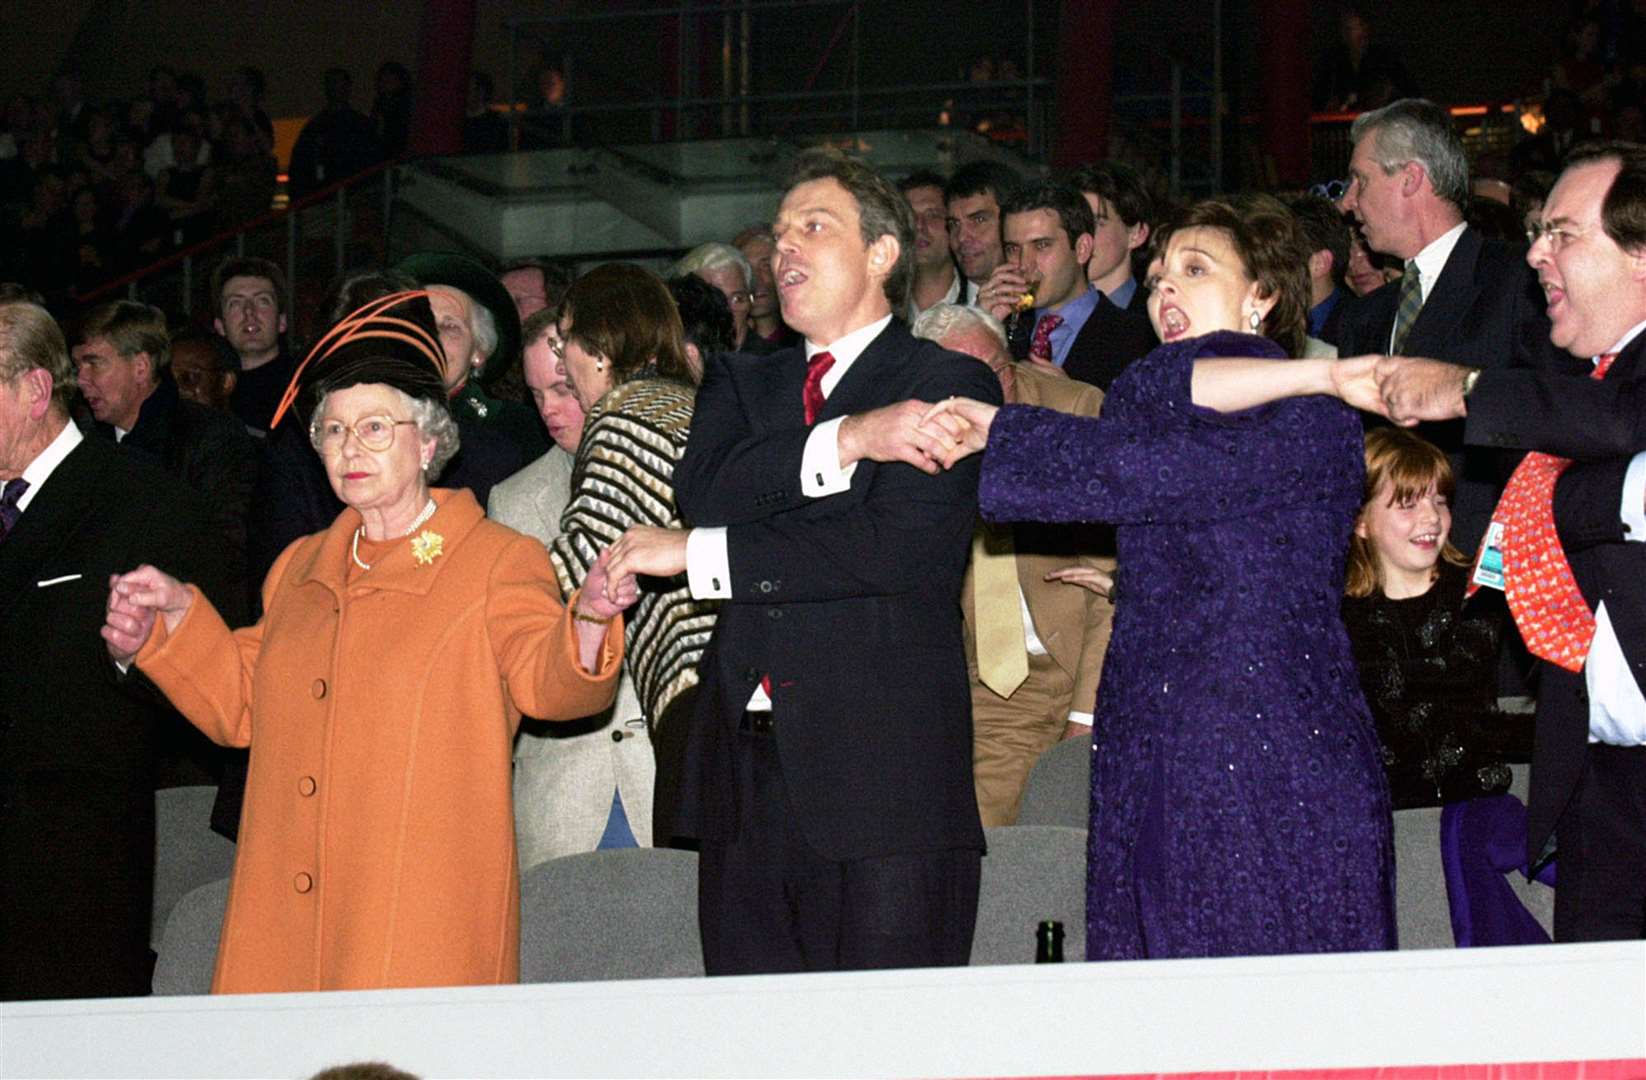 The Queen joins Tony Blair and wife Cherie as they sing Auld Lang Syne in the Millennium Dome to mark the start of 2000 (PA)